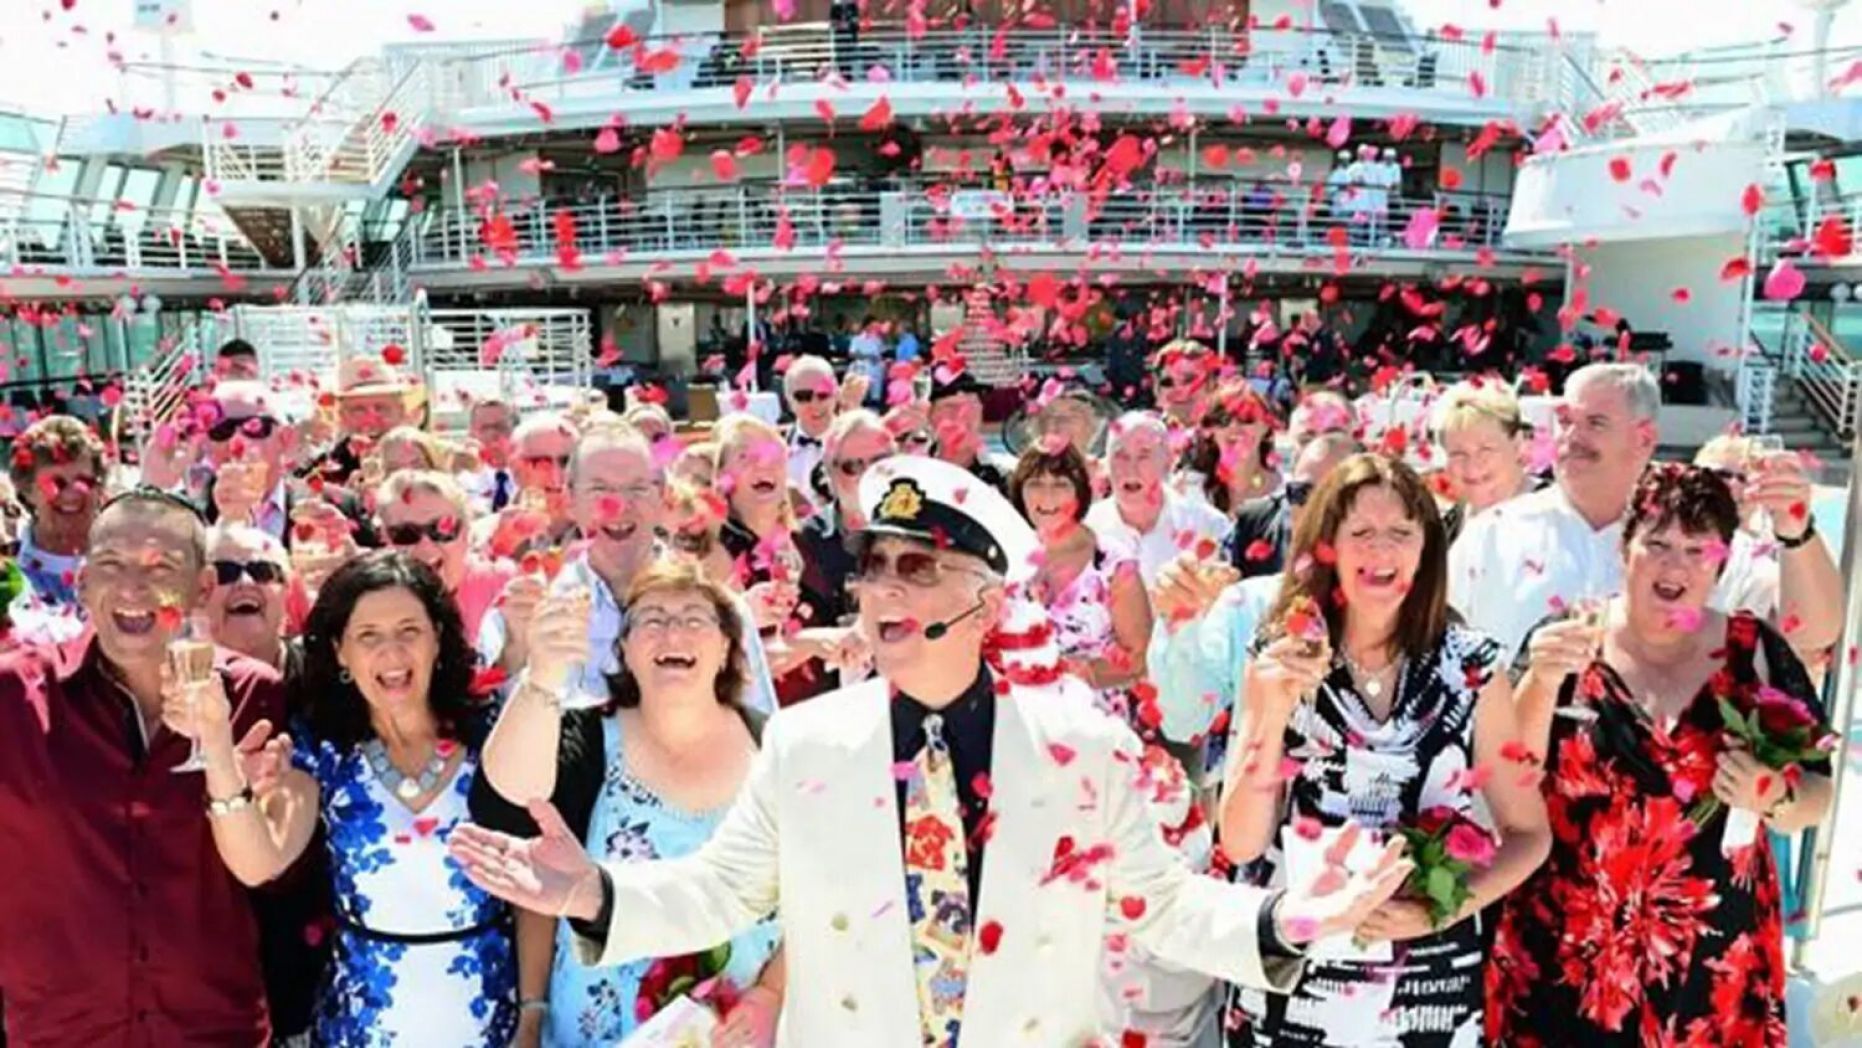 Largest multi-location vow renewal ceremony: Princess Cruises sets world record